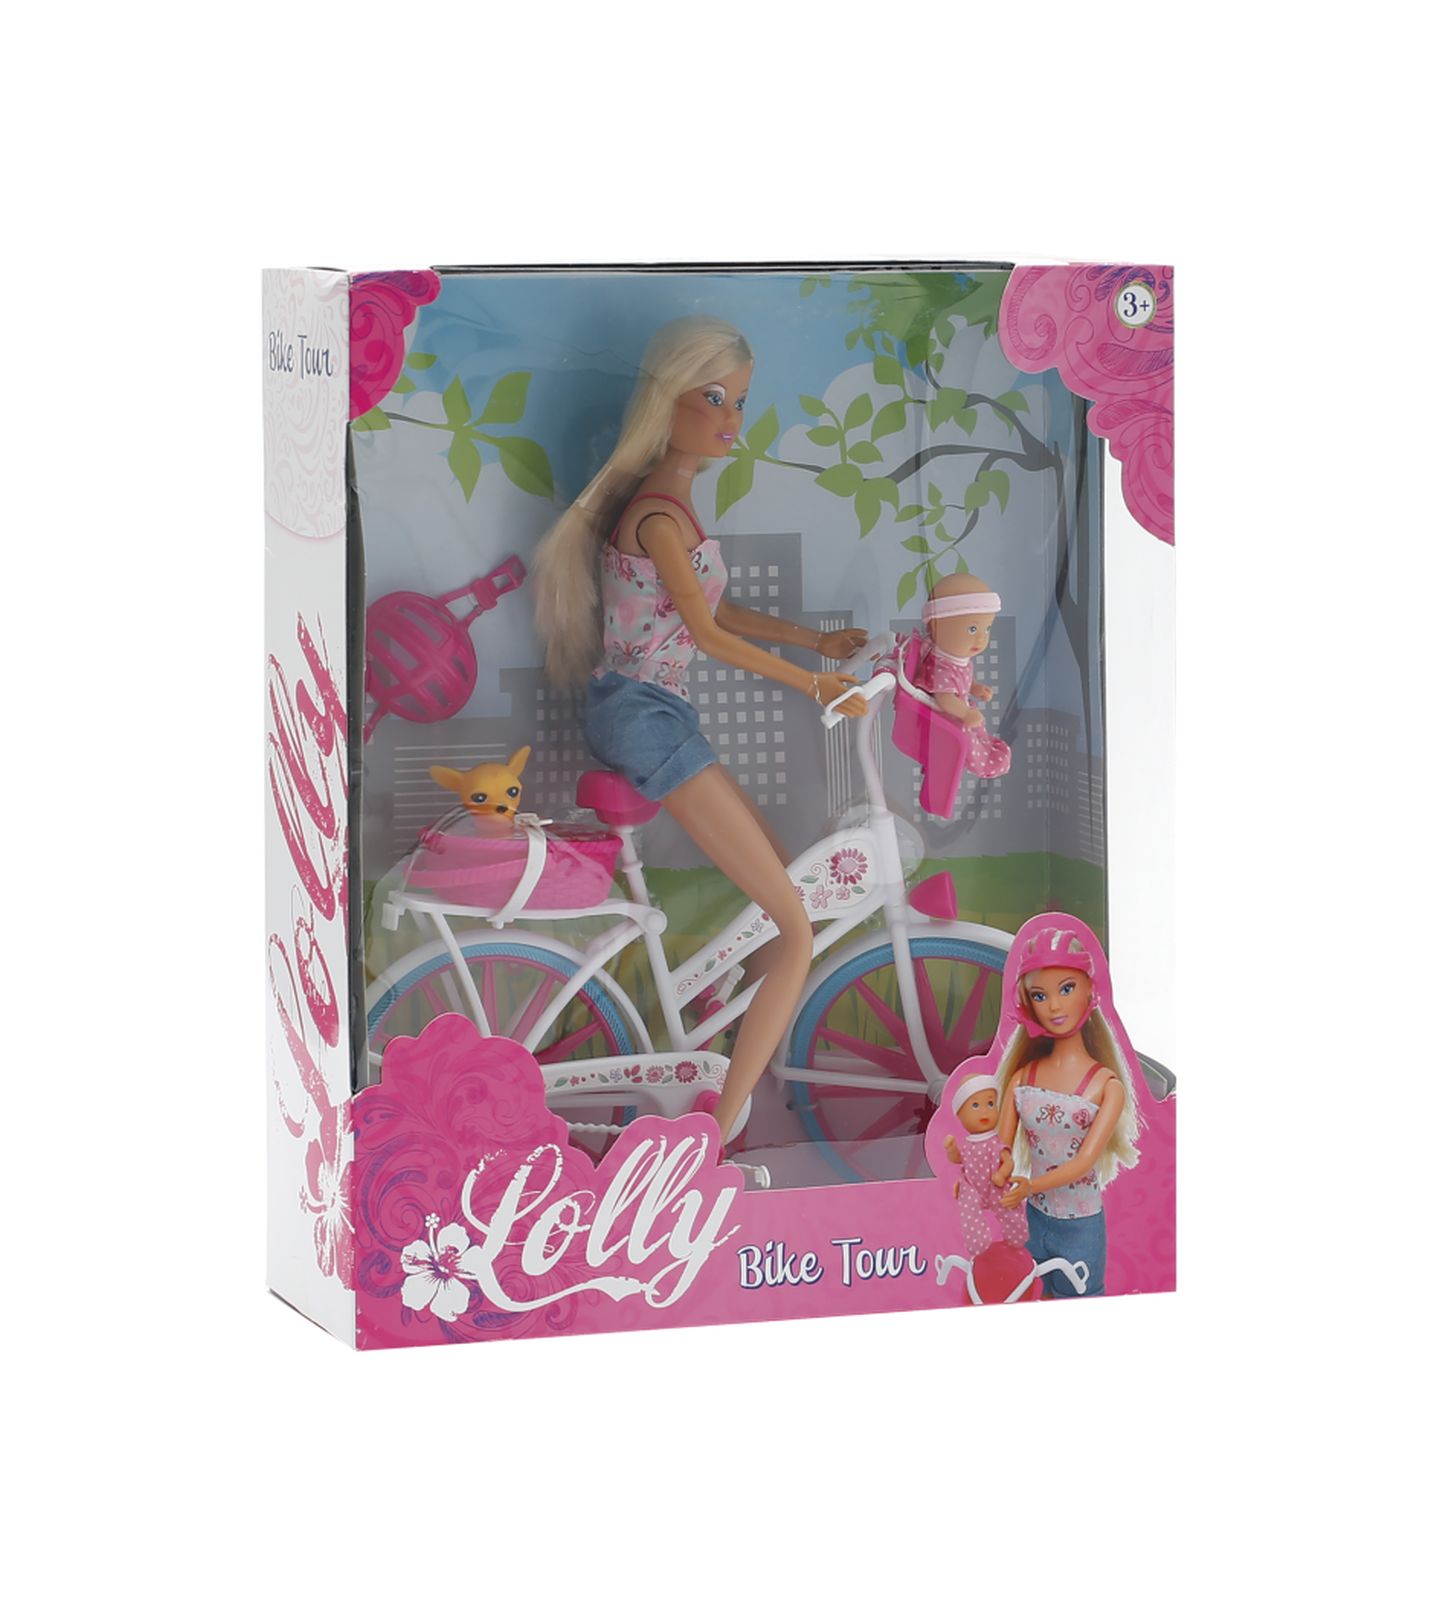 Lolly bike tour - LOLLY